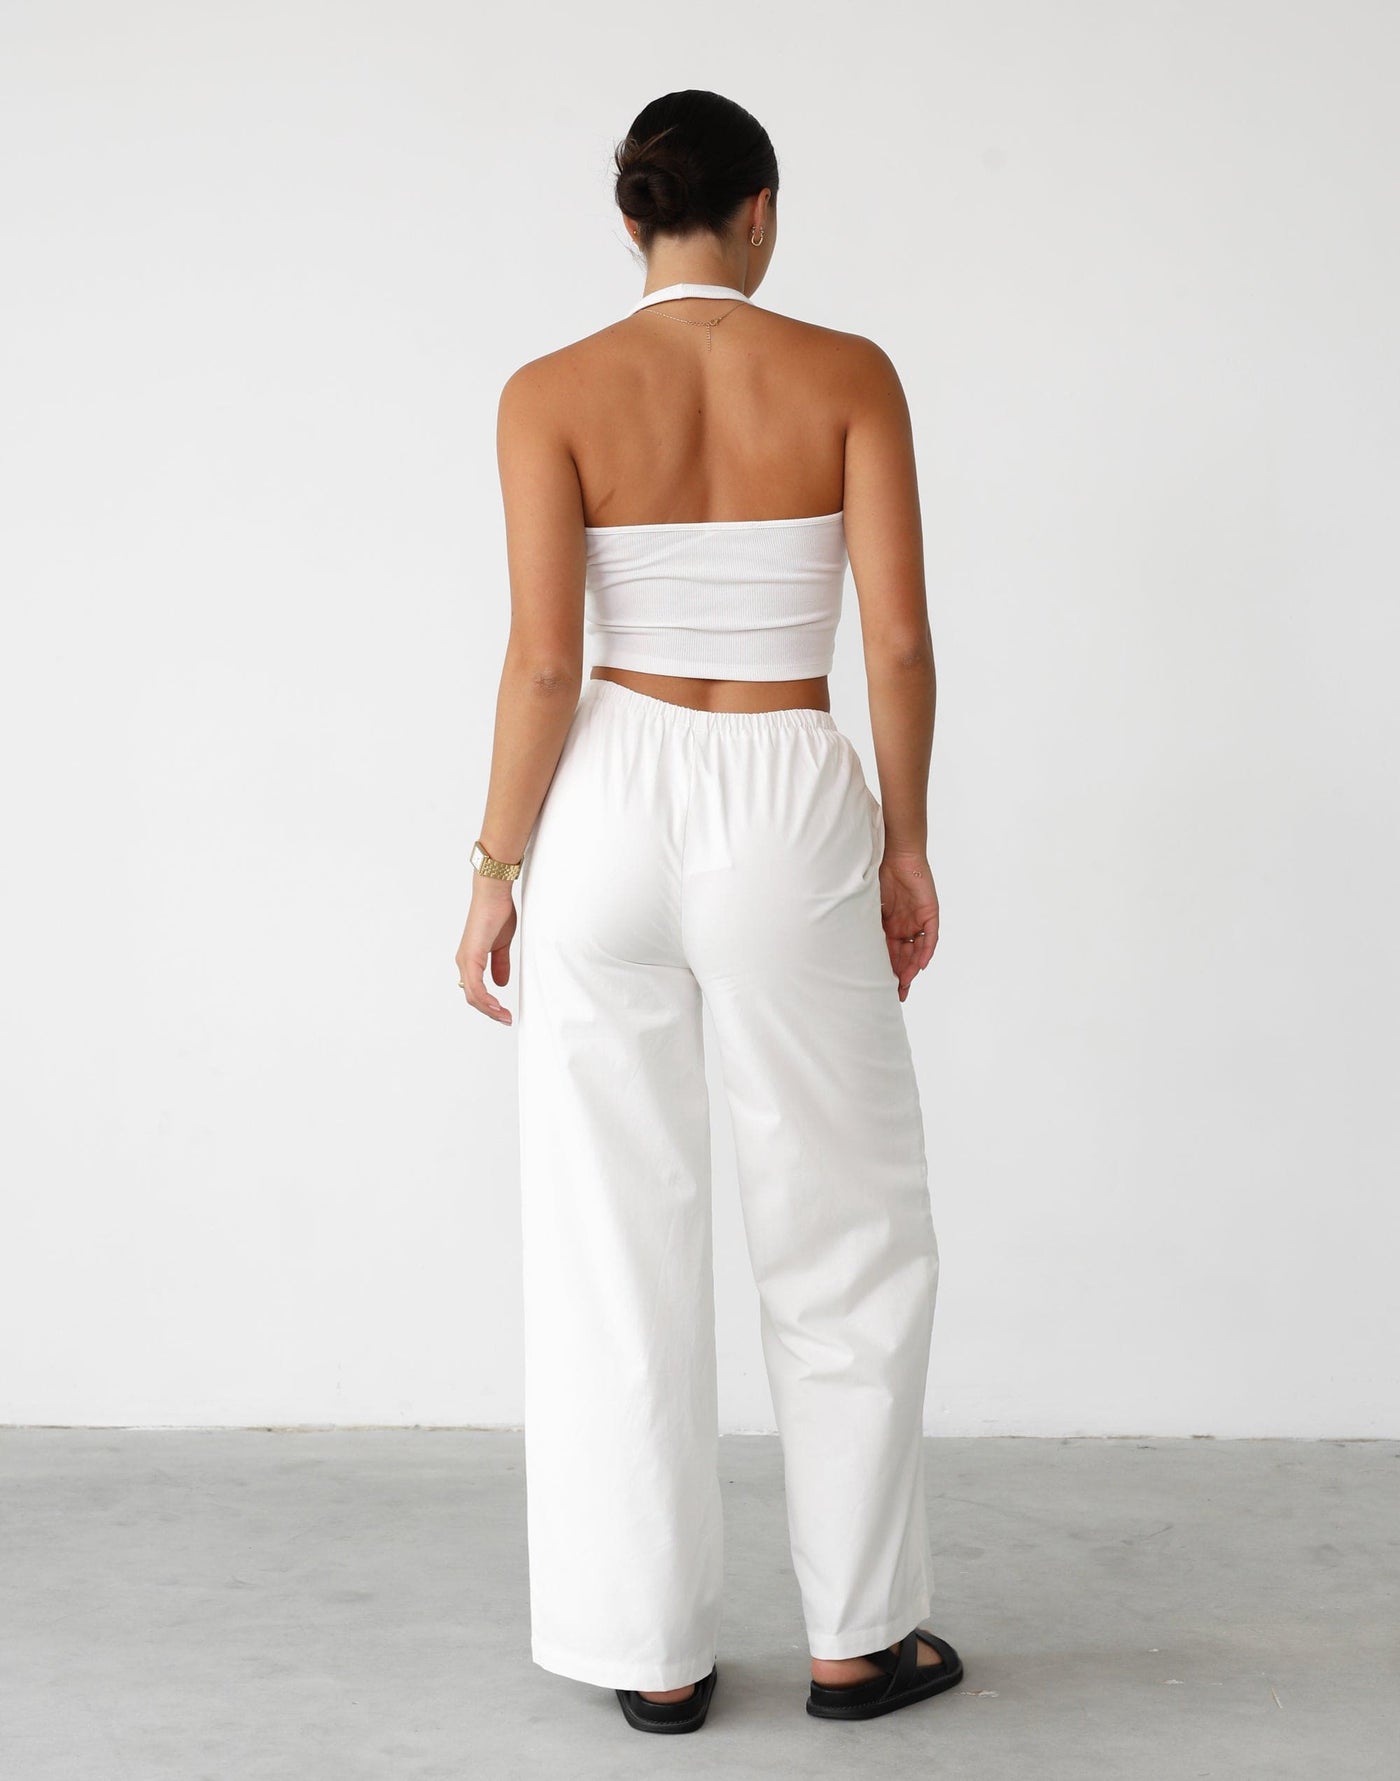 Archie Pants (White) - White Linen Elasticated Tie Up Pants - Women's Pants - Charcoal Clothing